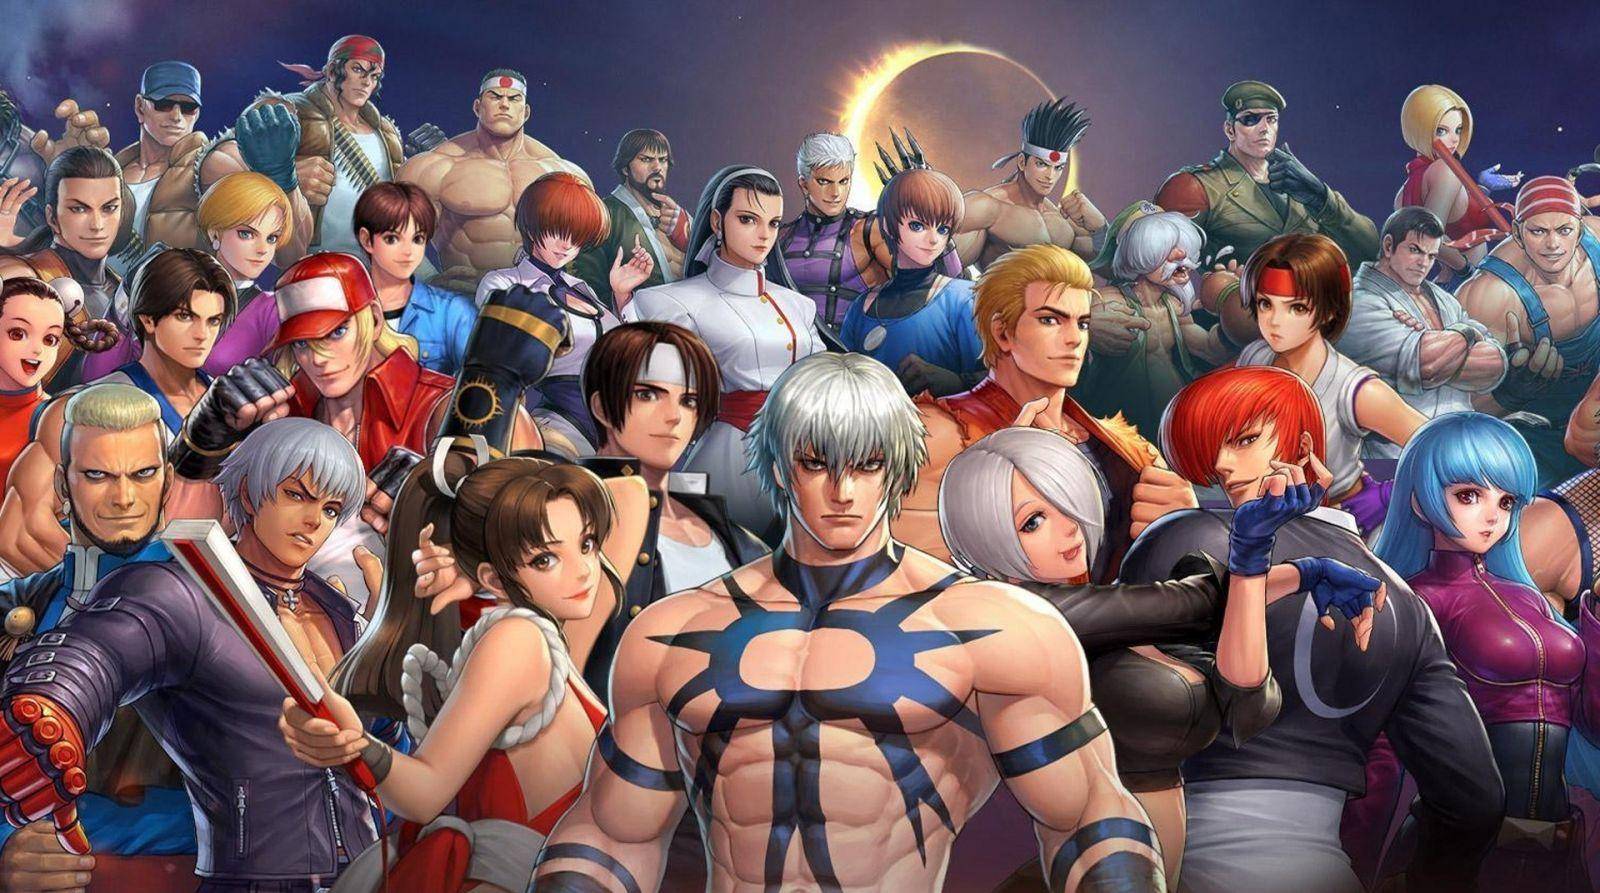 the king of fighters 99 poster todos los jugadores